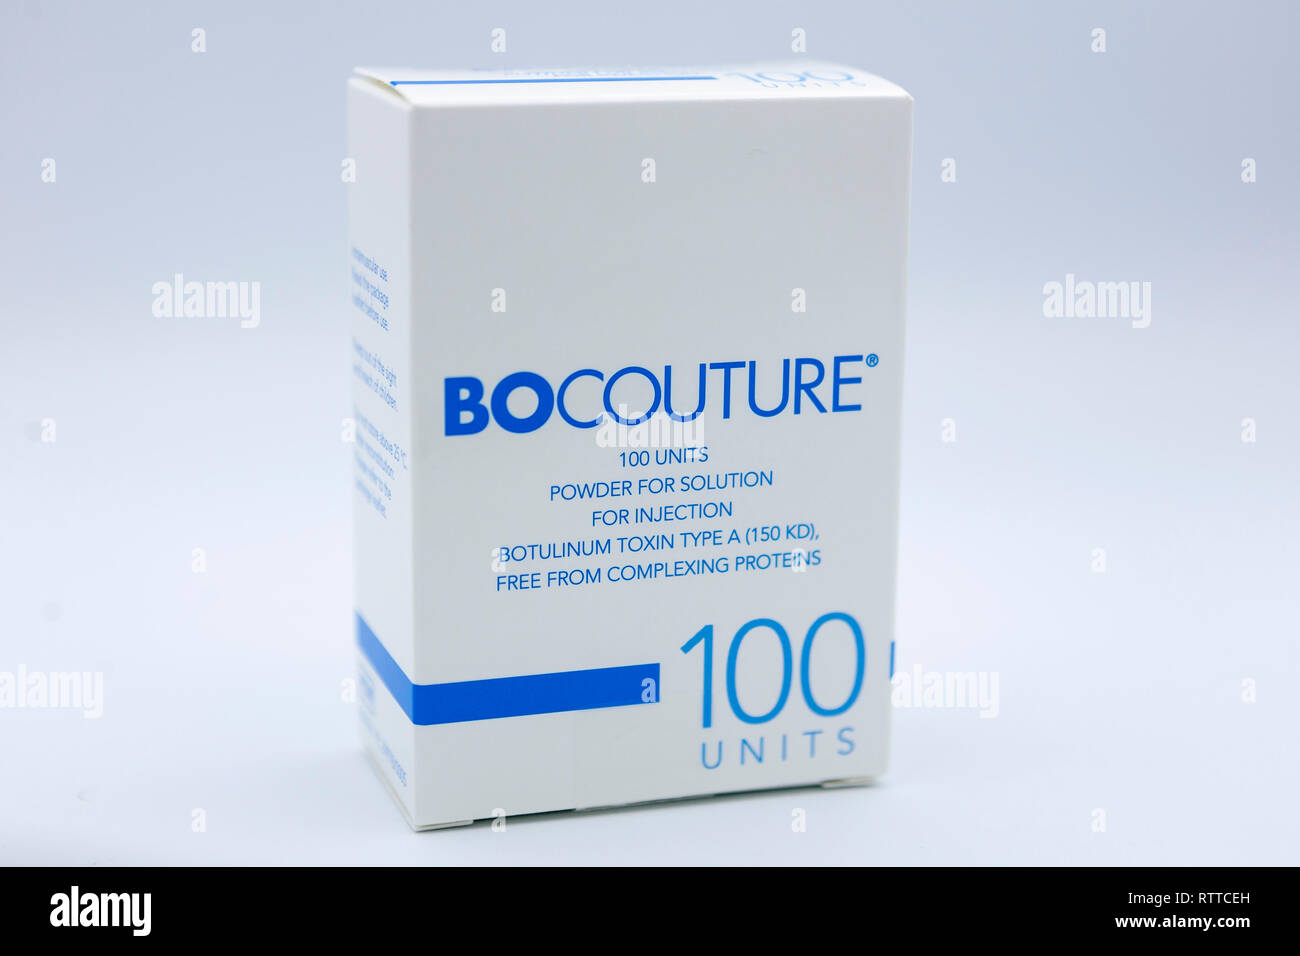 A box of 100 Units, powder for solution for injection Botulinum Toxin Type A (150 KD), free from complexing proteins. Botulinum toxin. Botulinum toxin Stock Photo